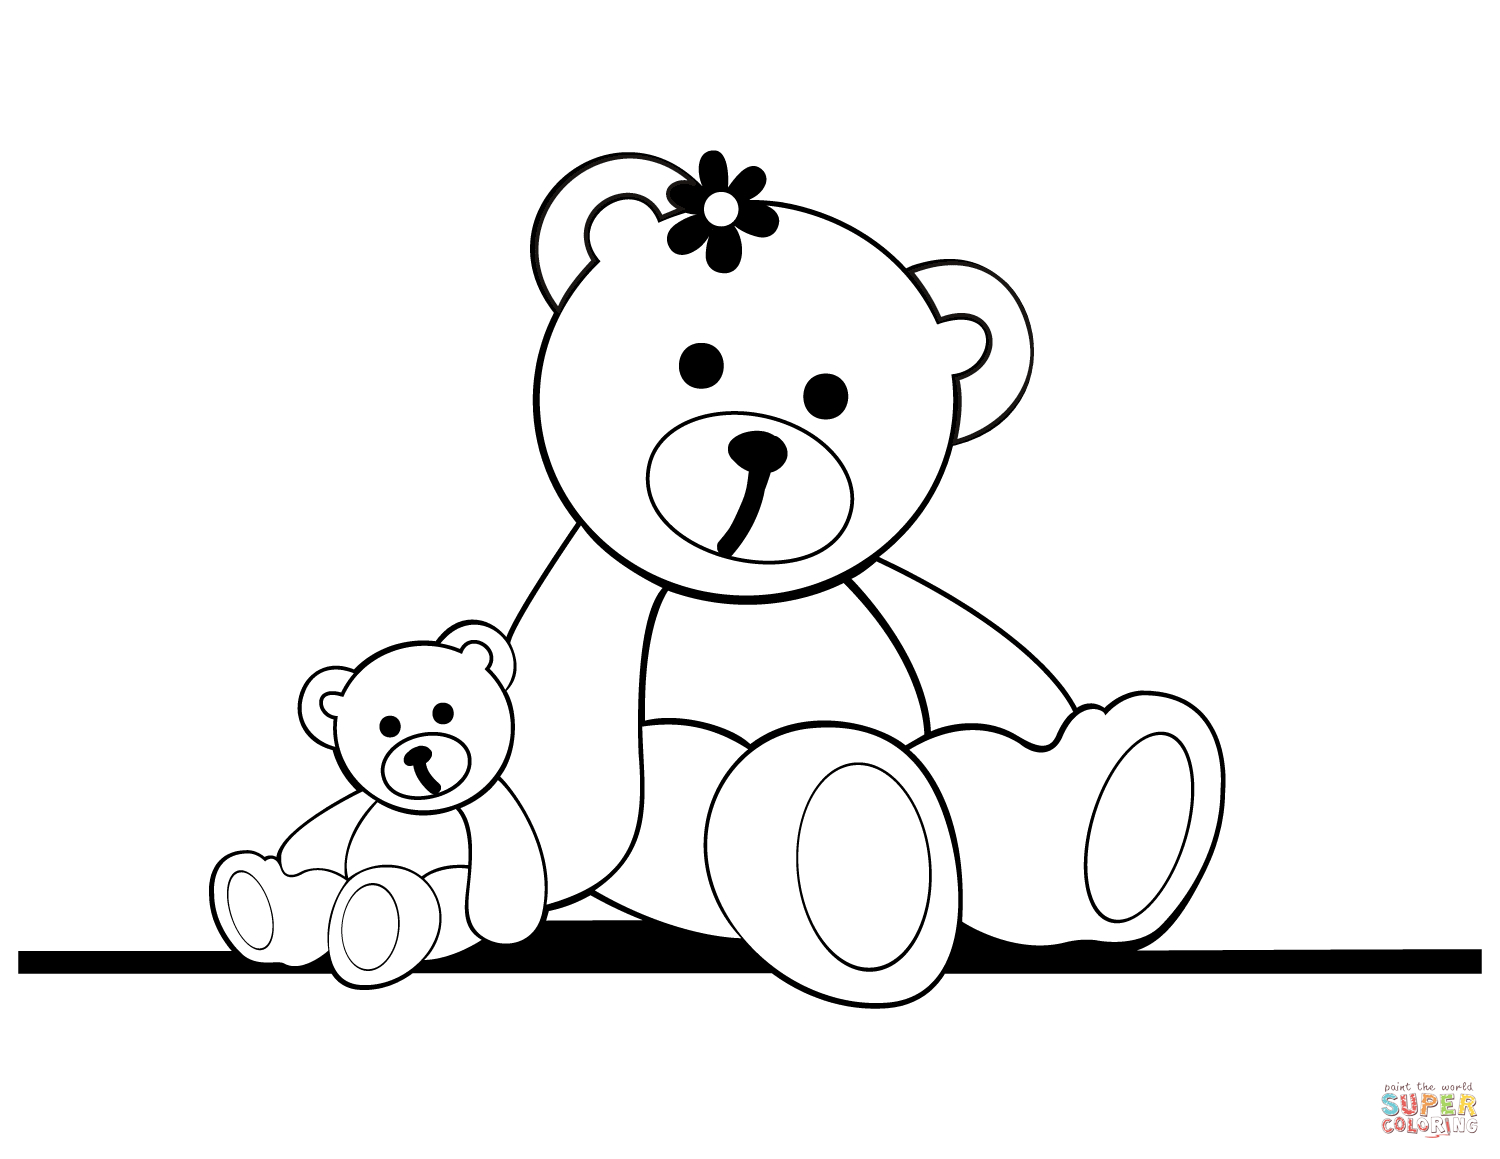 Teddy Bear Coloring Pages | Free Coloring Pages - Teddy Bear Coloring Pages Free Printable